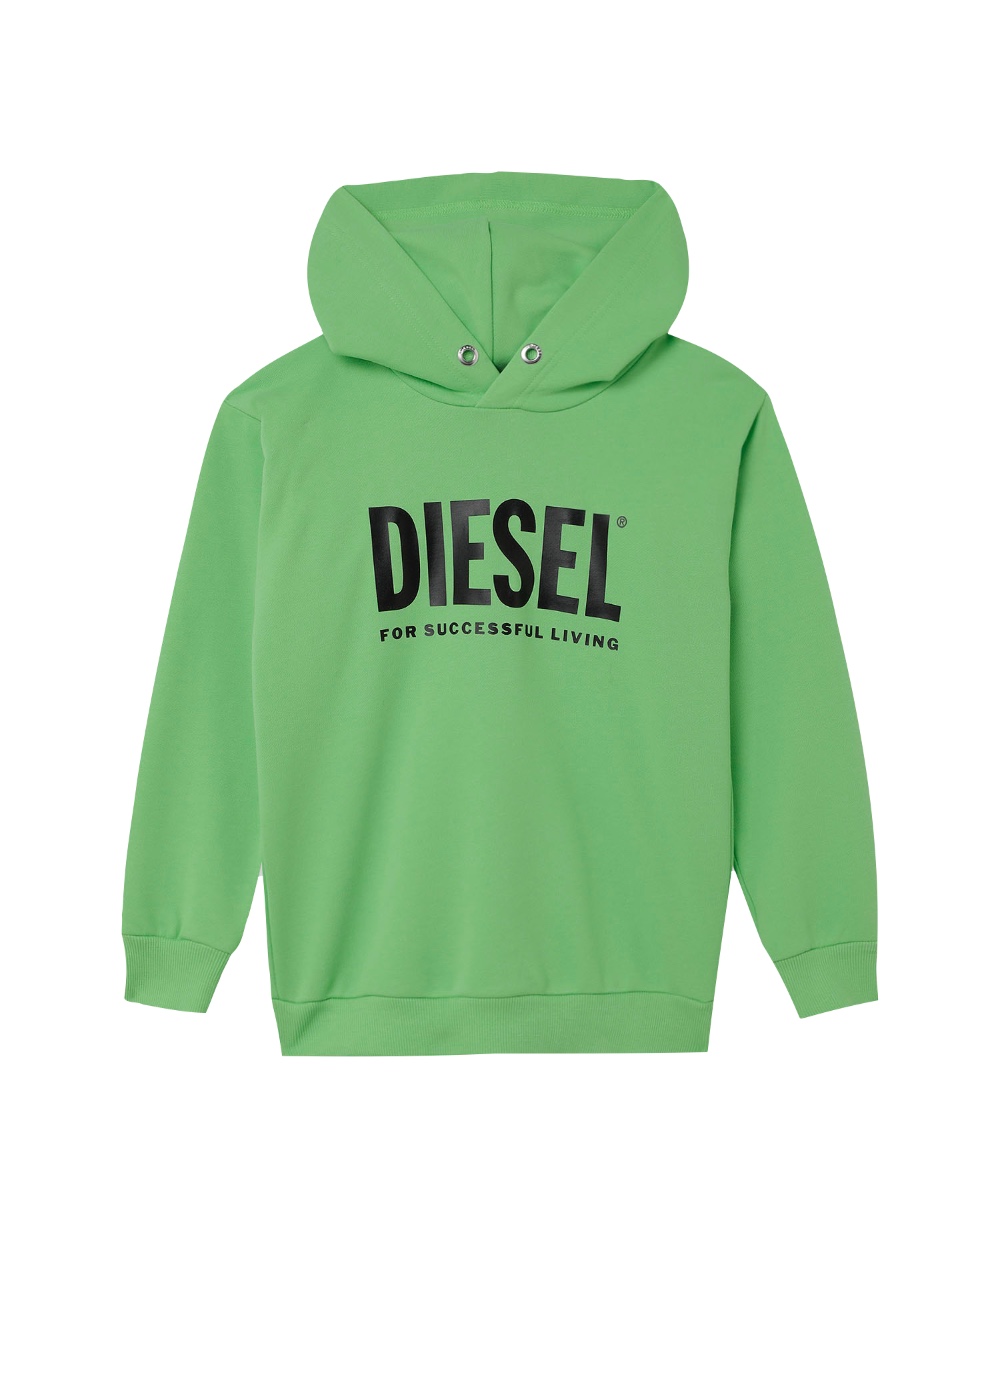 Featured image for “DIESEL SDIVISION-LOGOX OVER”